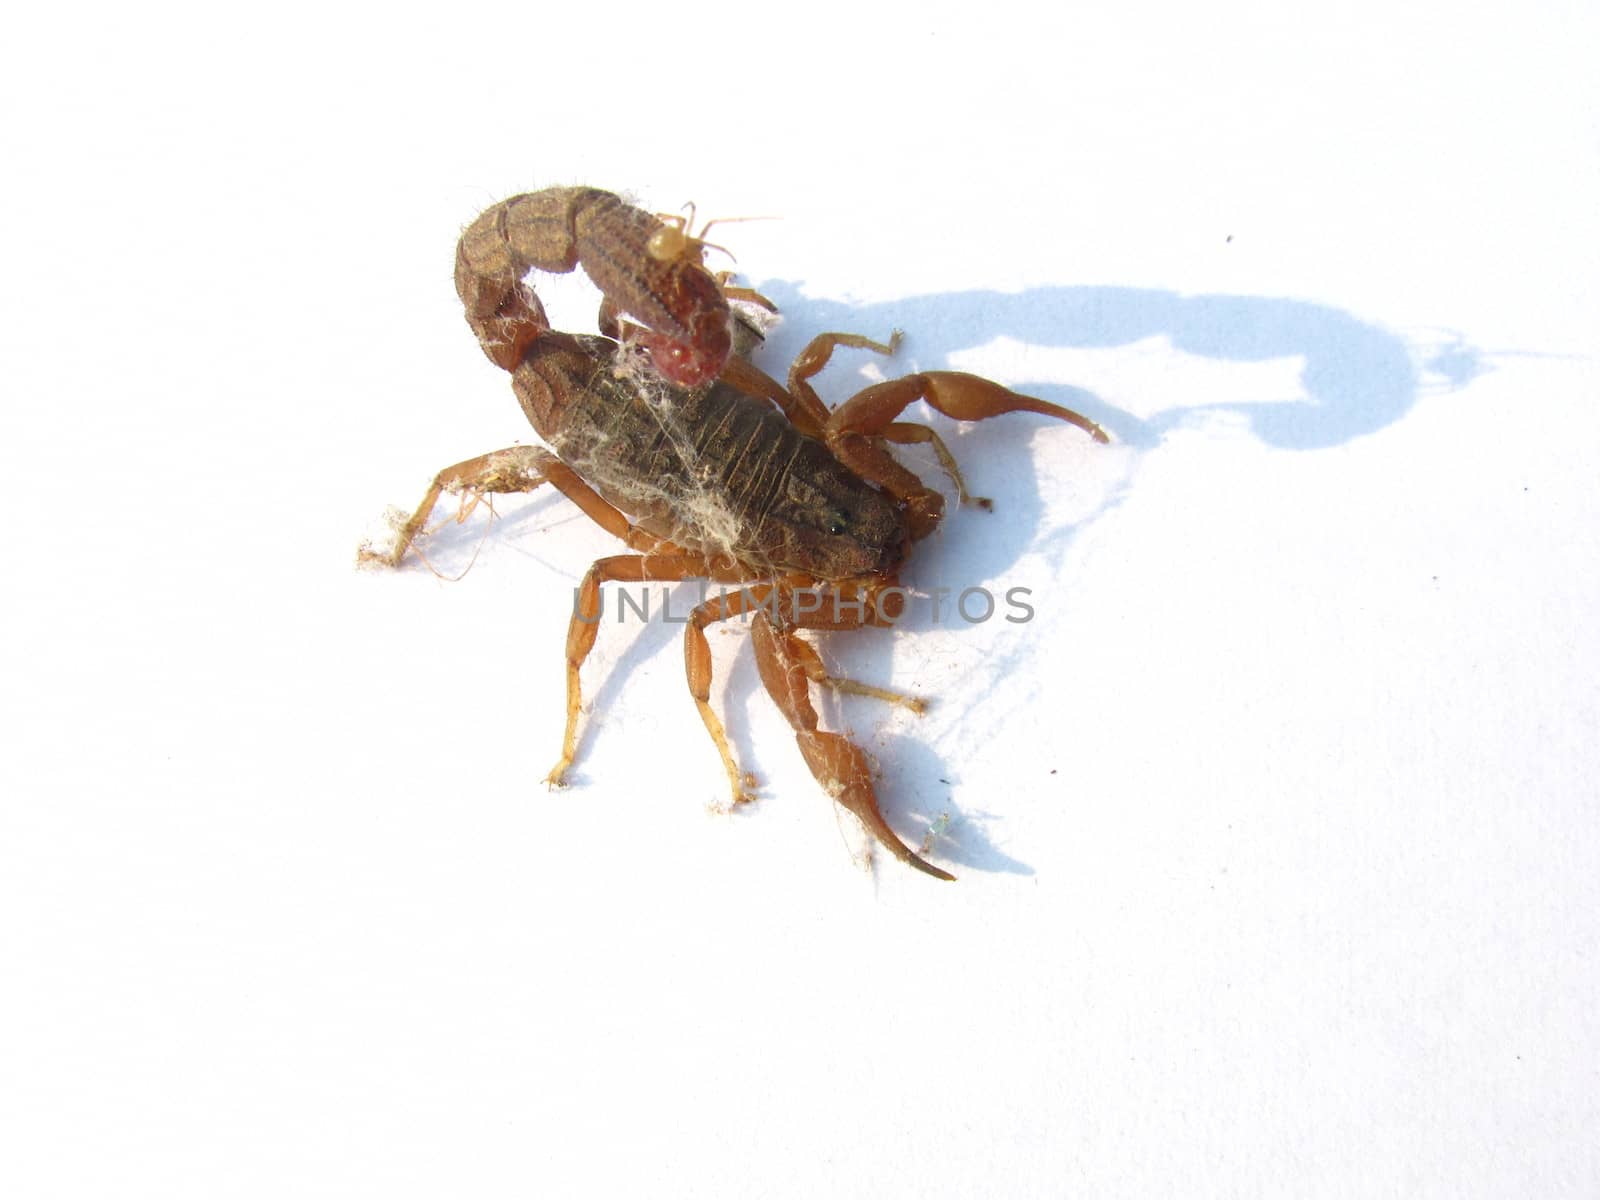 Poisonous scorpion isolated on white background by lkant